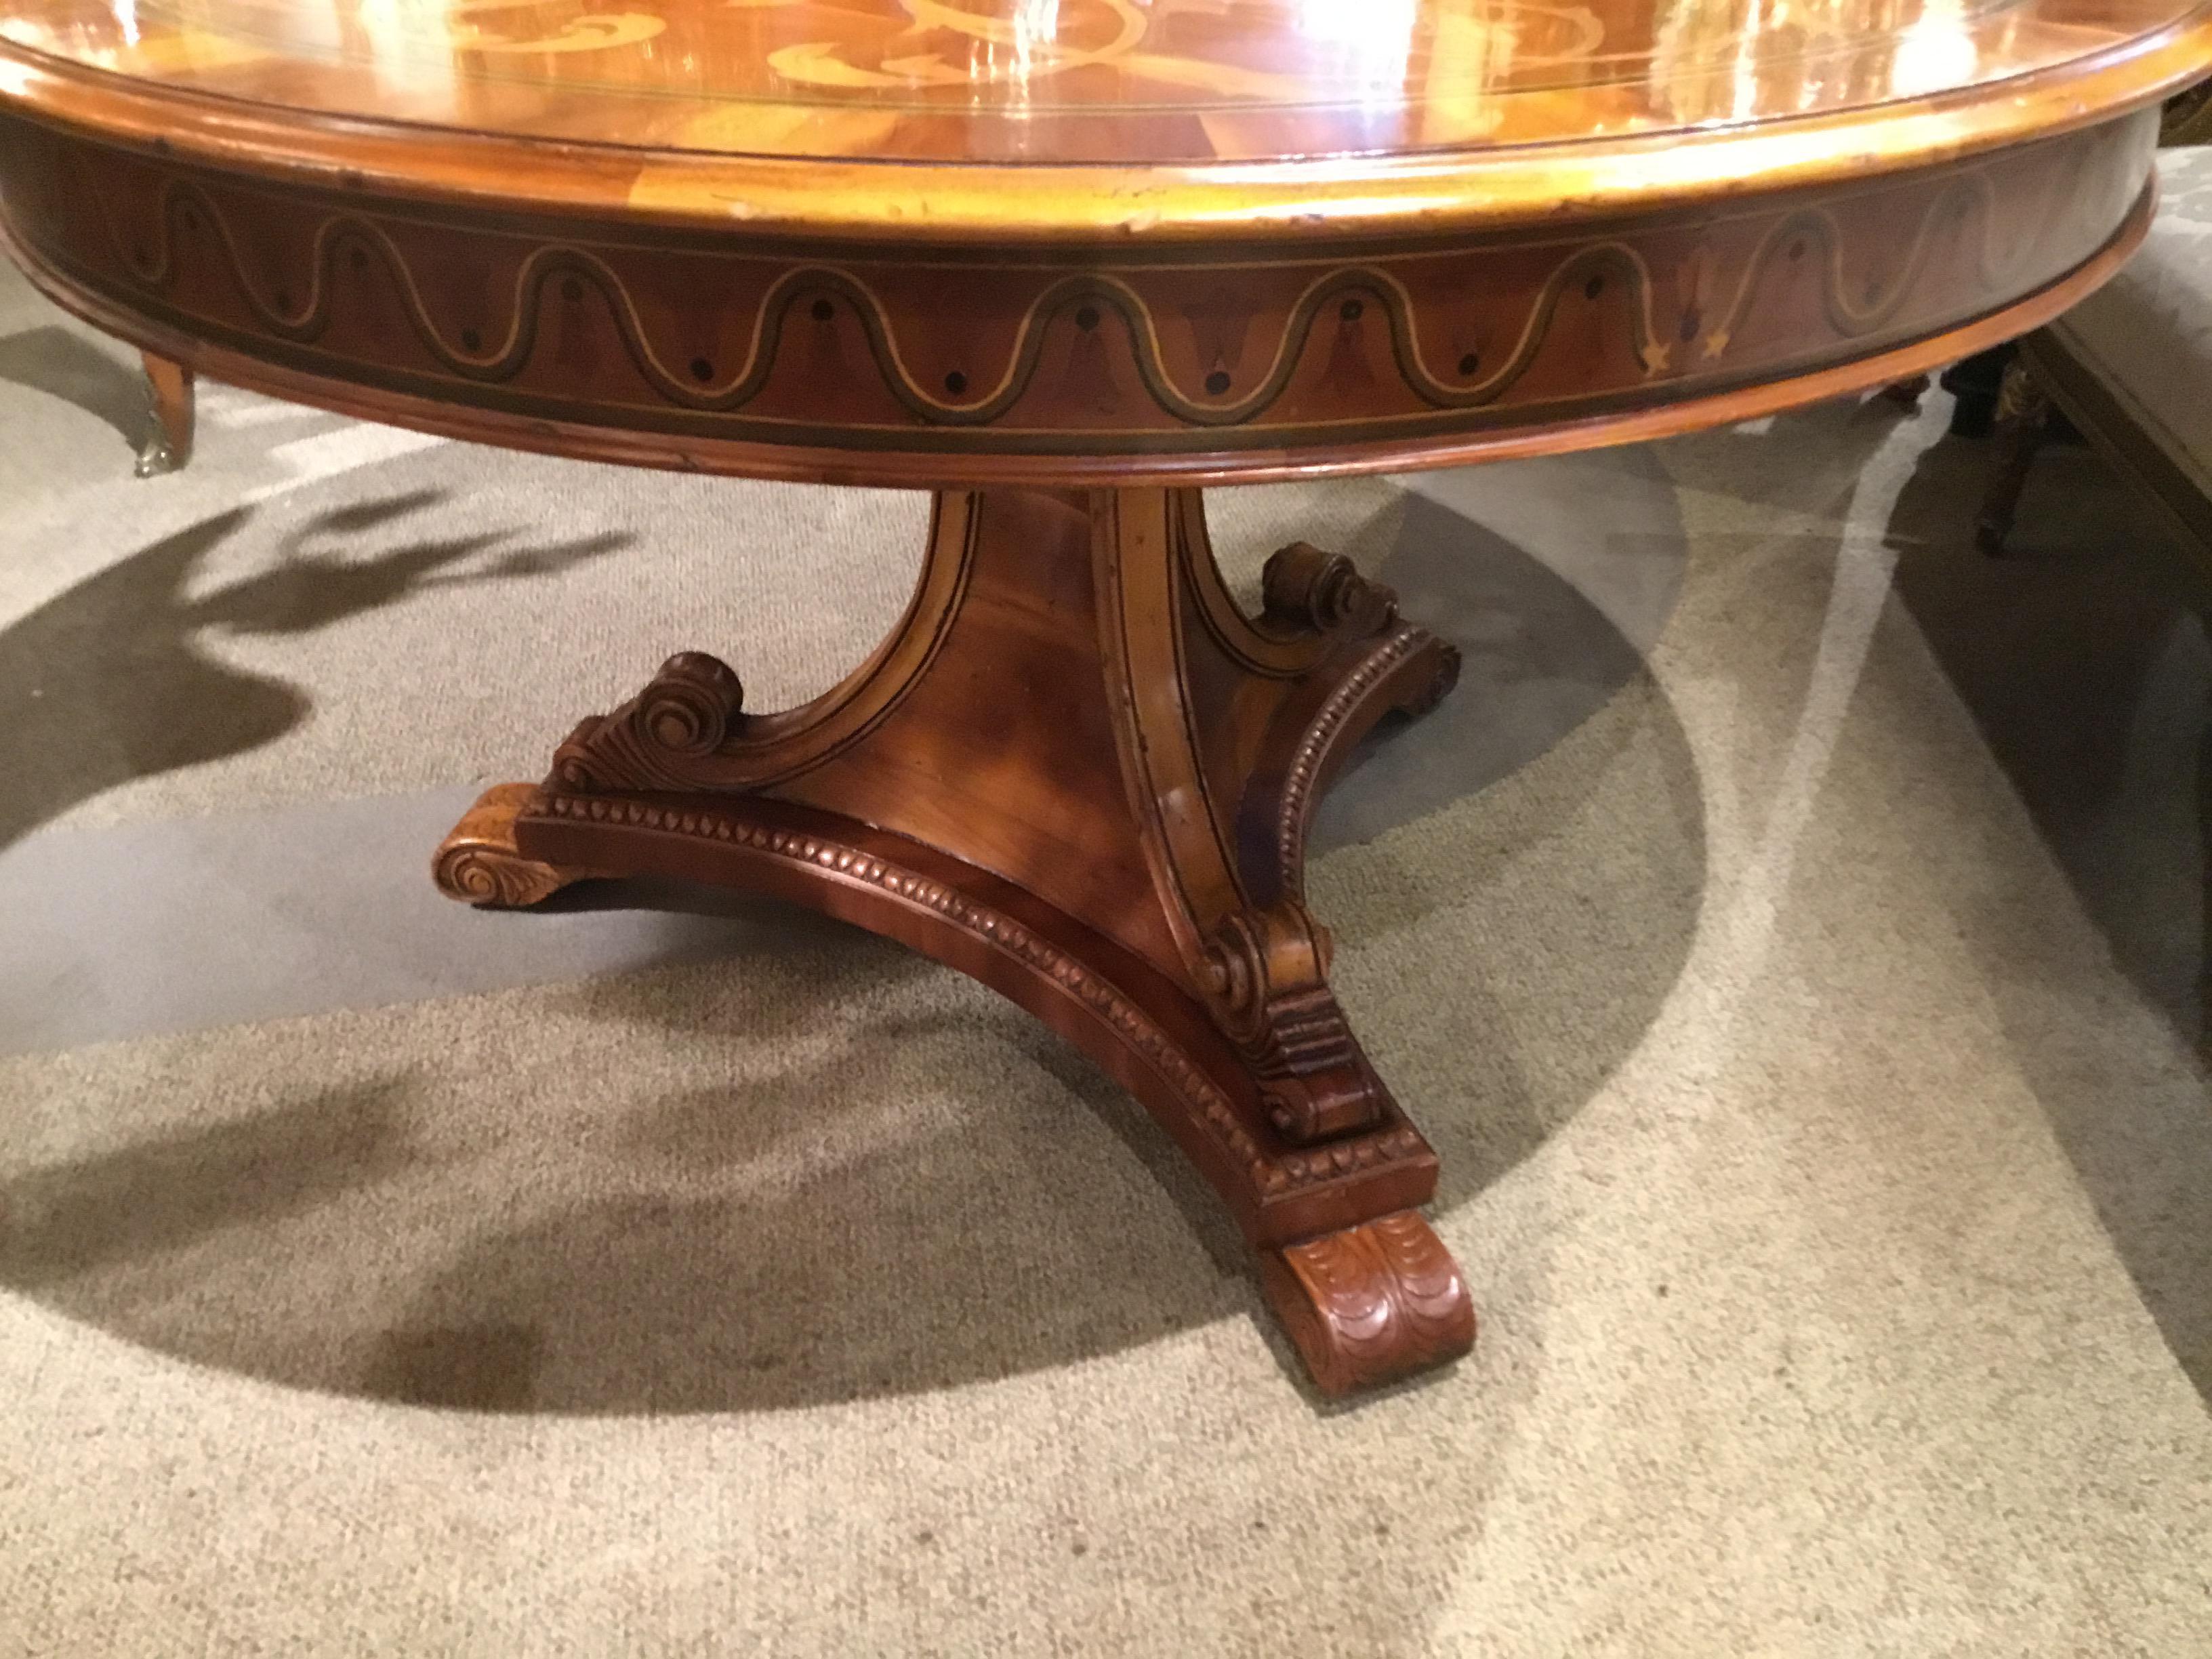 Late 20th Century Italian Style Round Center Table, Cherrywood with Satinwood Inlays